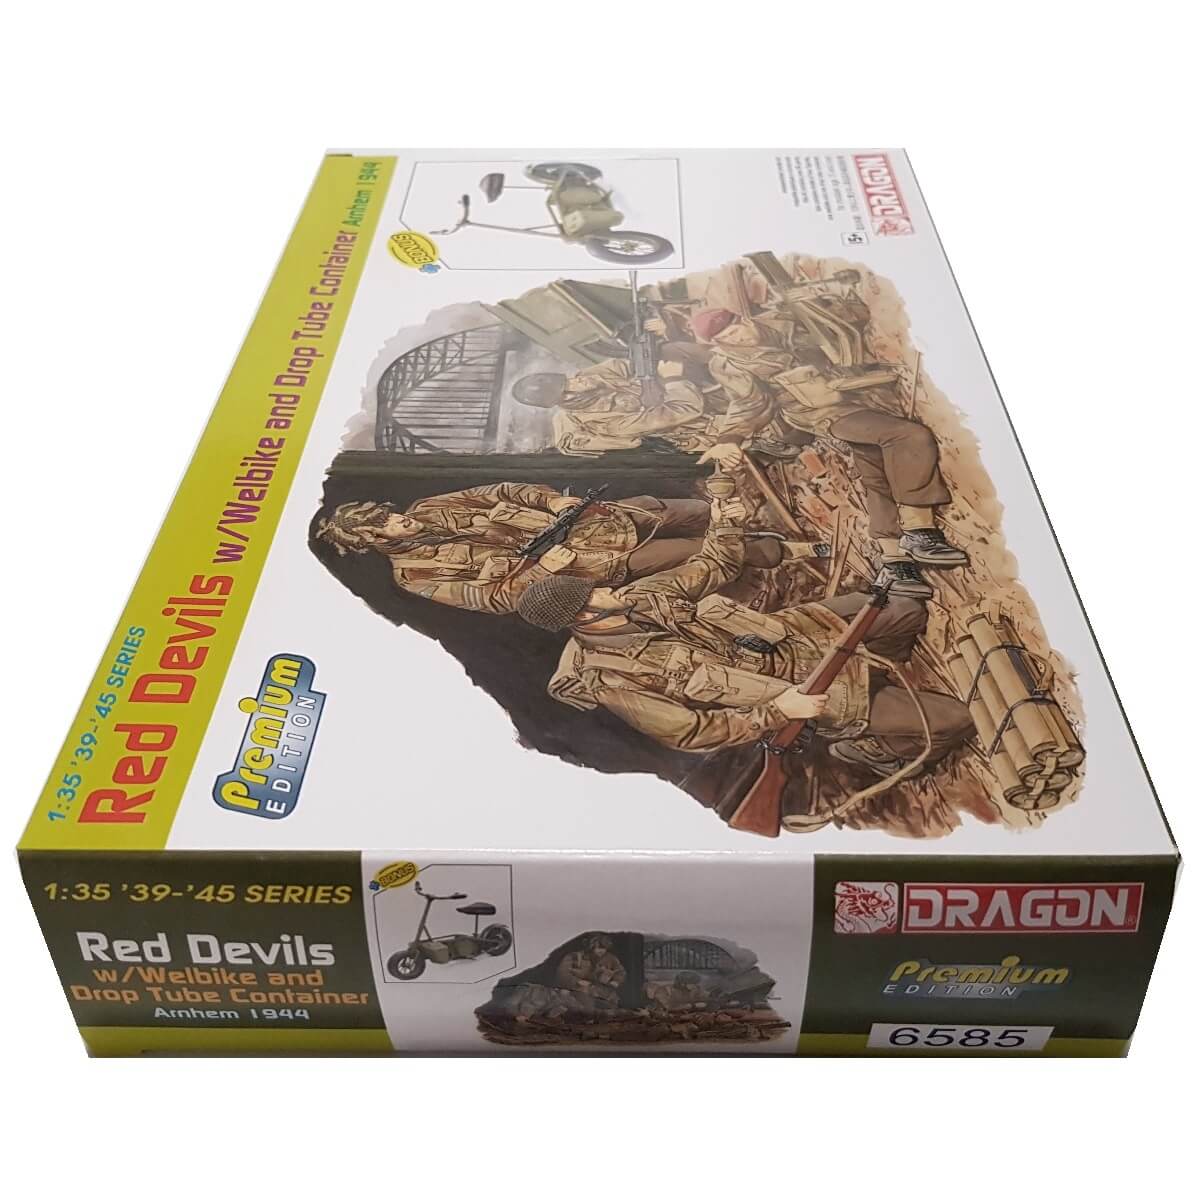 1:35 Red Devils with Welbike and Drop Tube Container - Arnhem 1944 - DRAGON